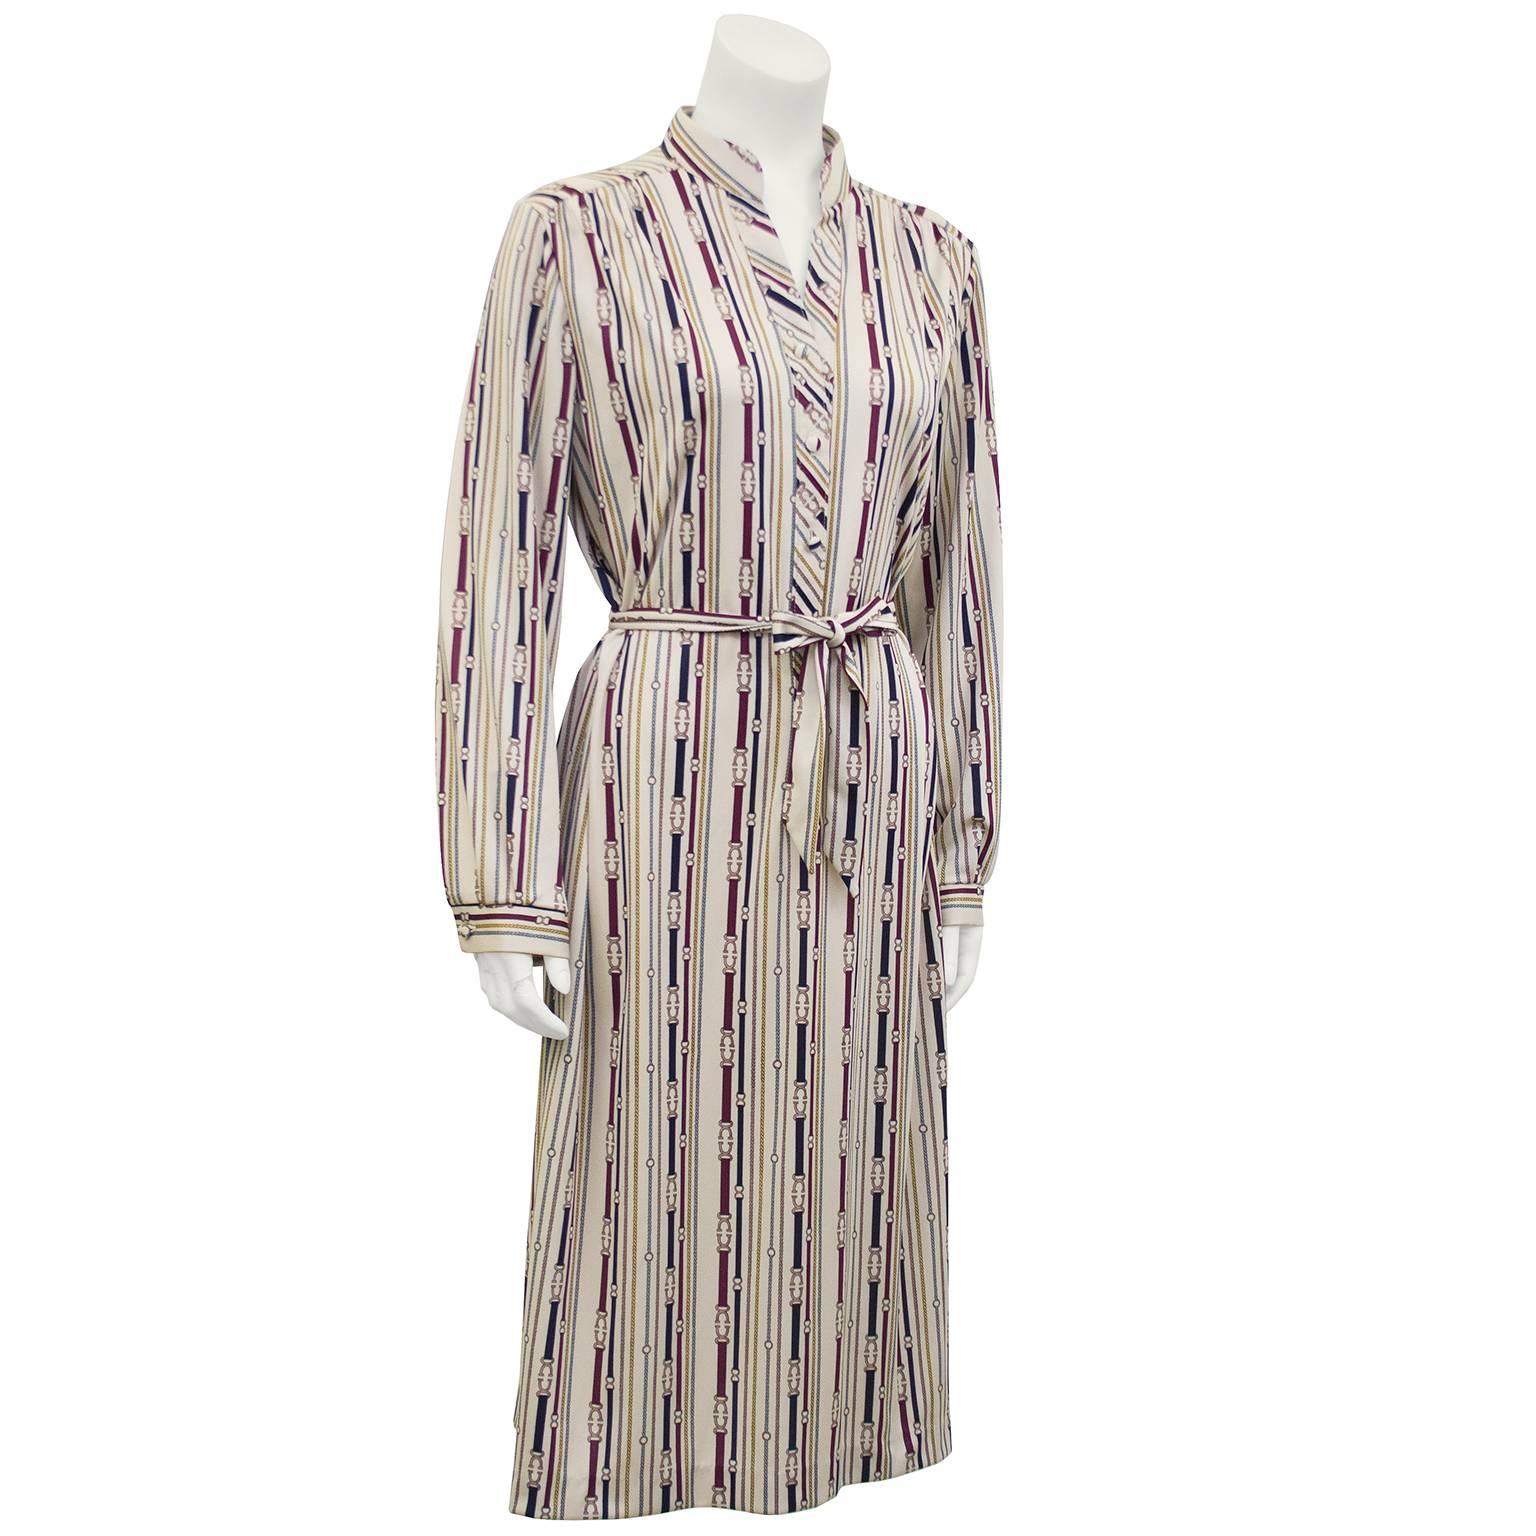 Great 1970s Lanvin polyester long sleeve dress. Nautically printed with vertical multi colour ropes and buckles. Henley collar with a matching fabric belt that can be styled to your liking. Excellent vintage condition. Fits like a US 6.

Sleeve 20